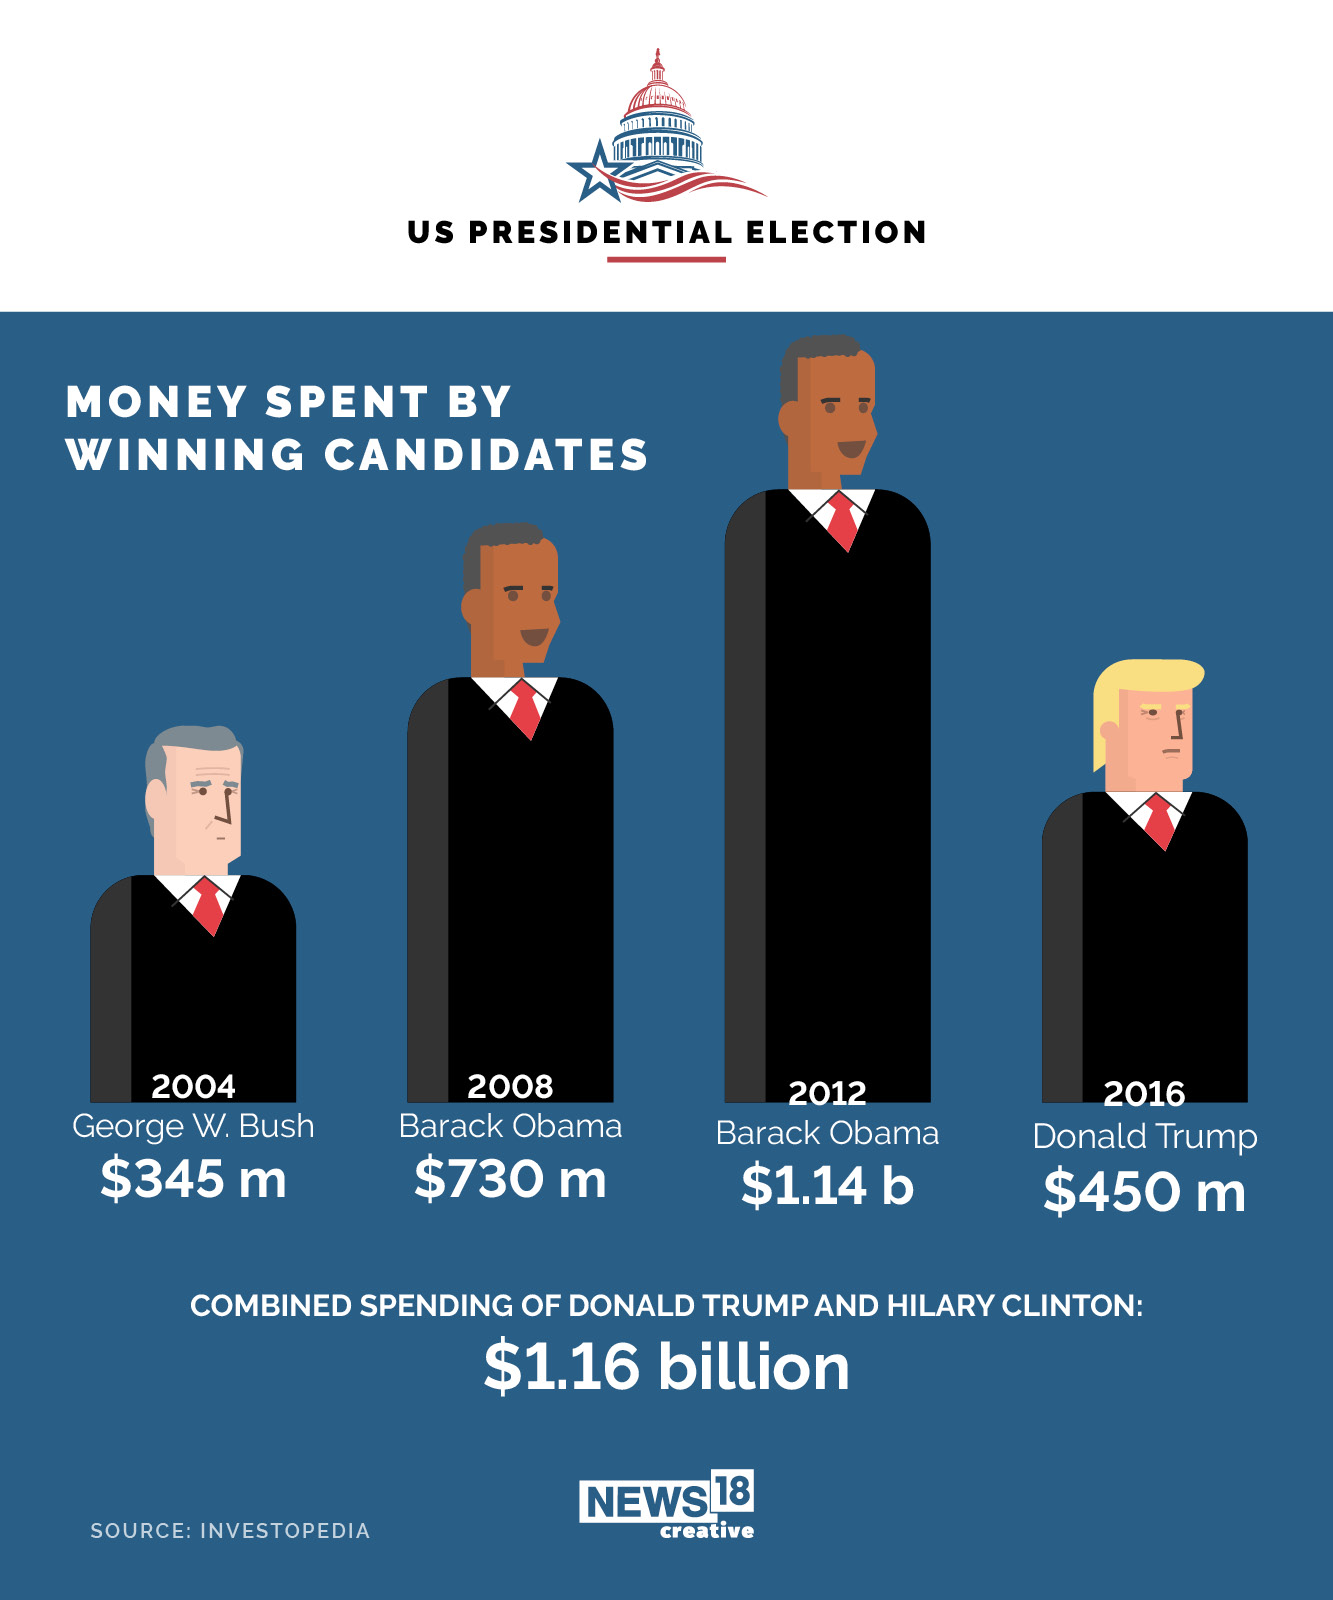 How much does it cost to run for US President?